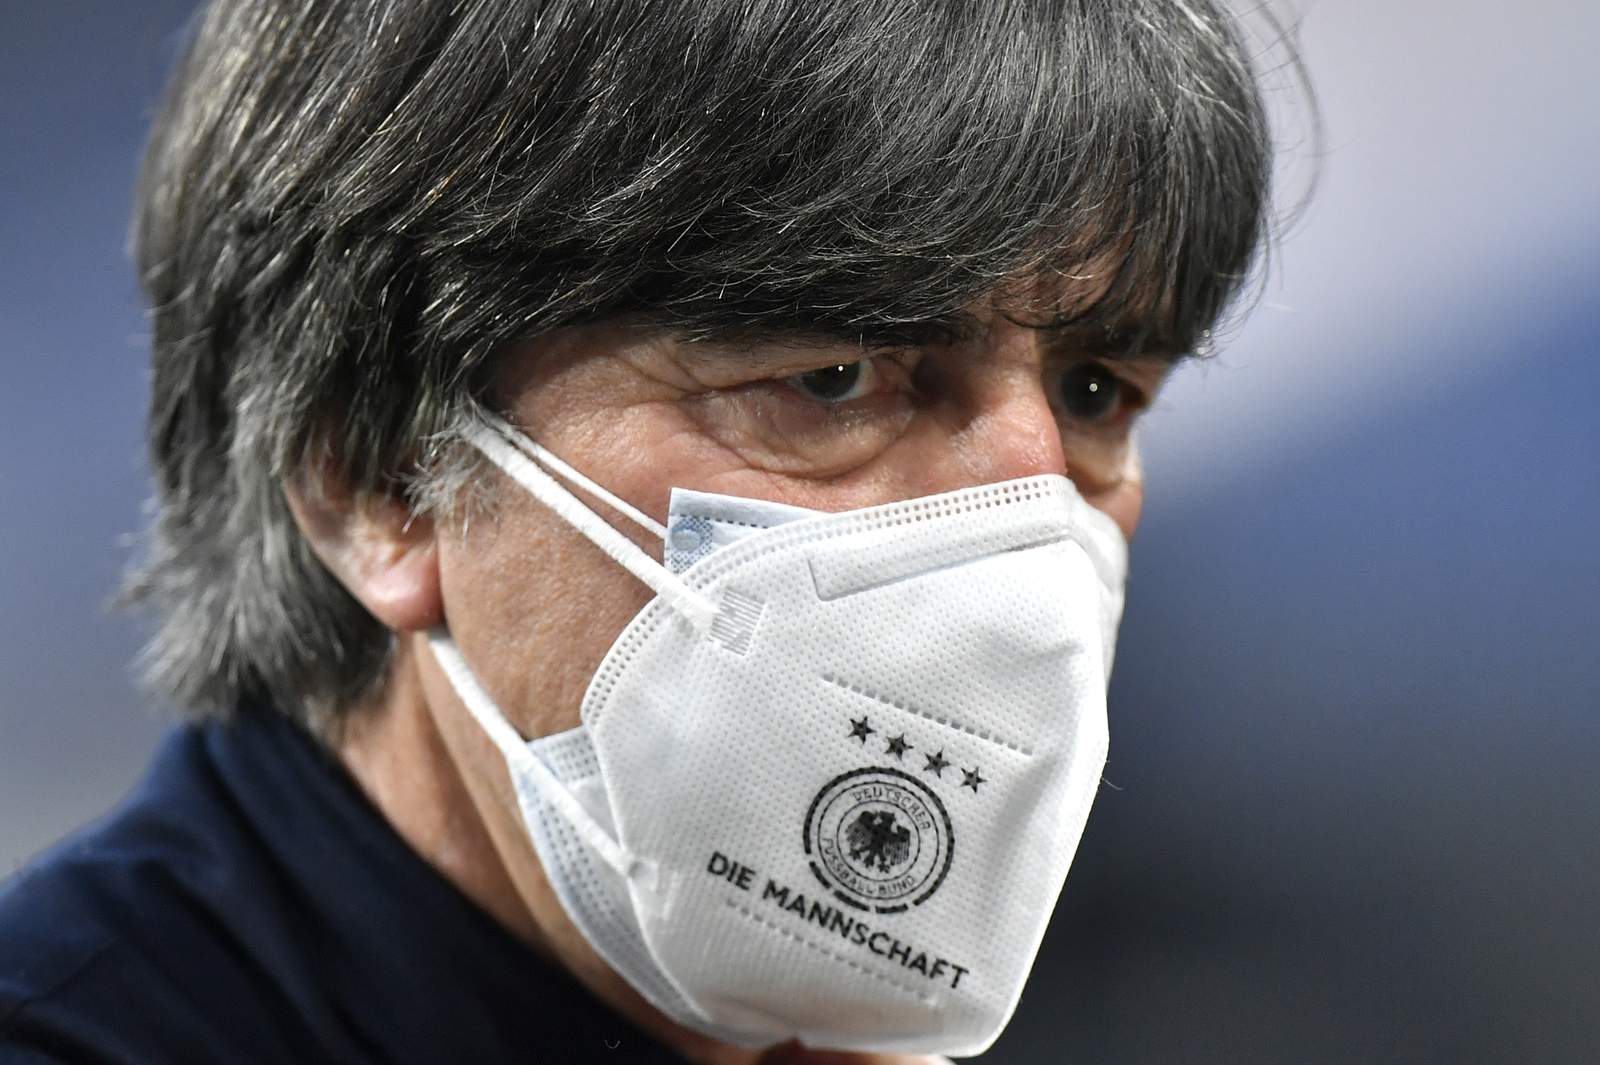 Löw limps closer to exit after Germany's latest painful loss